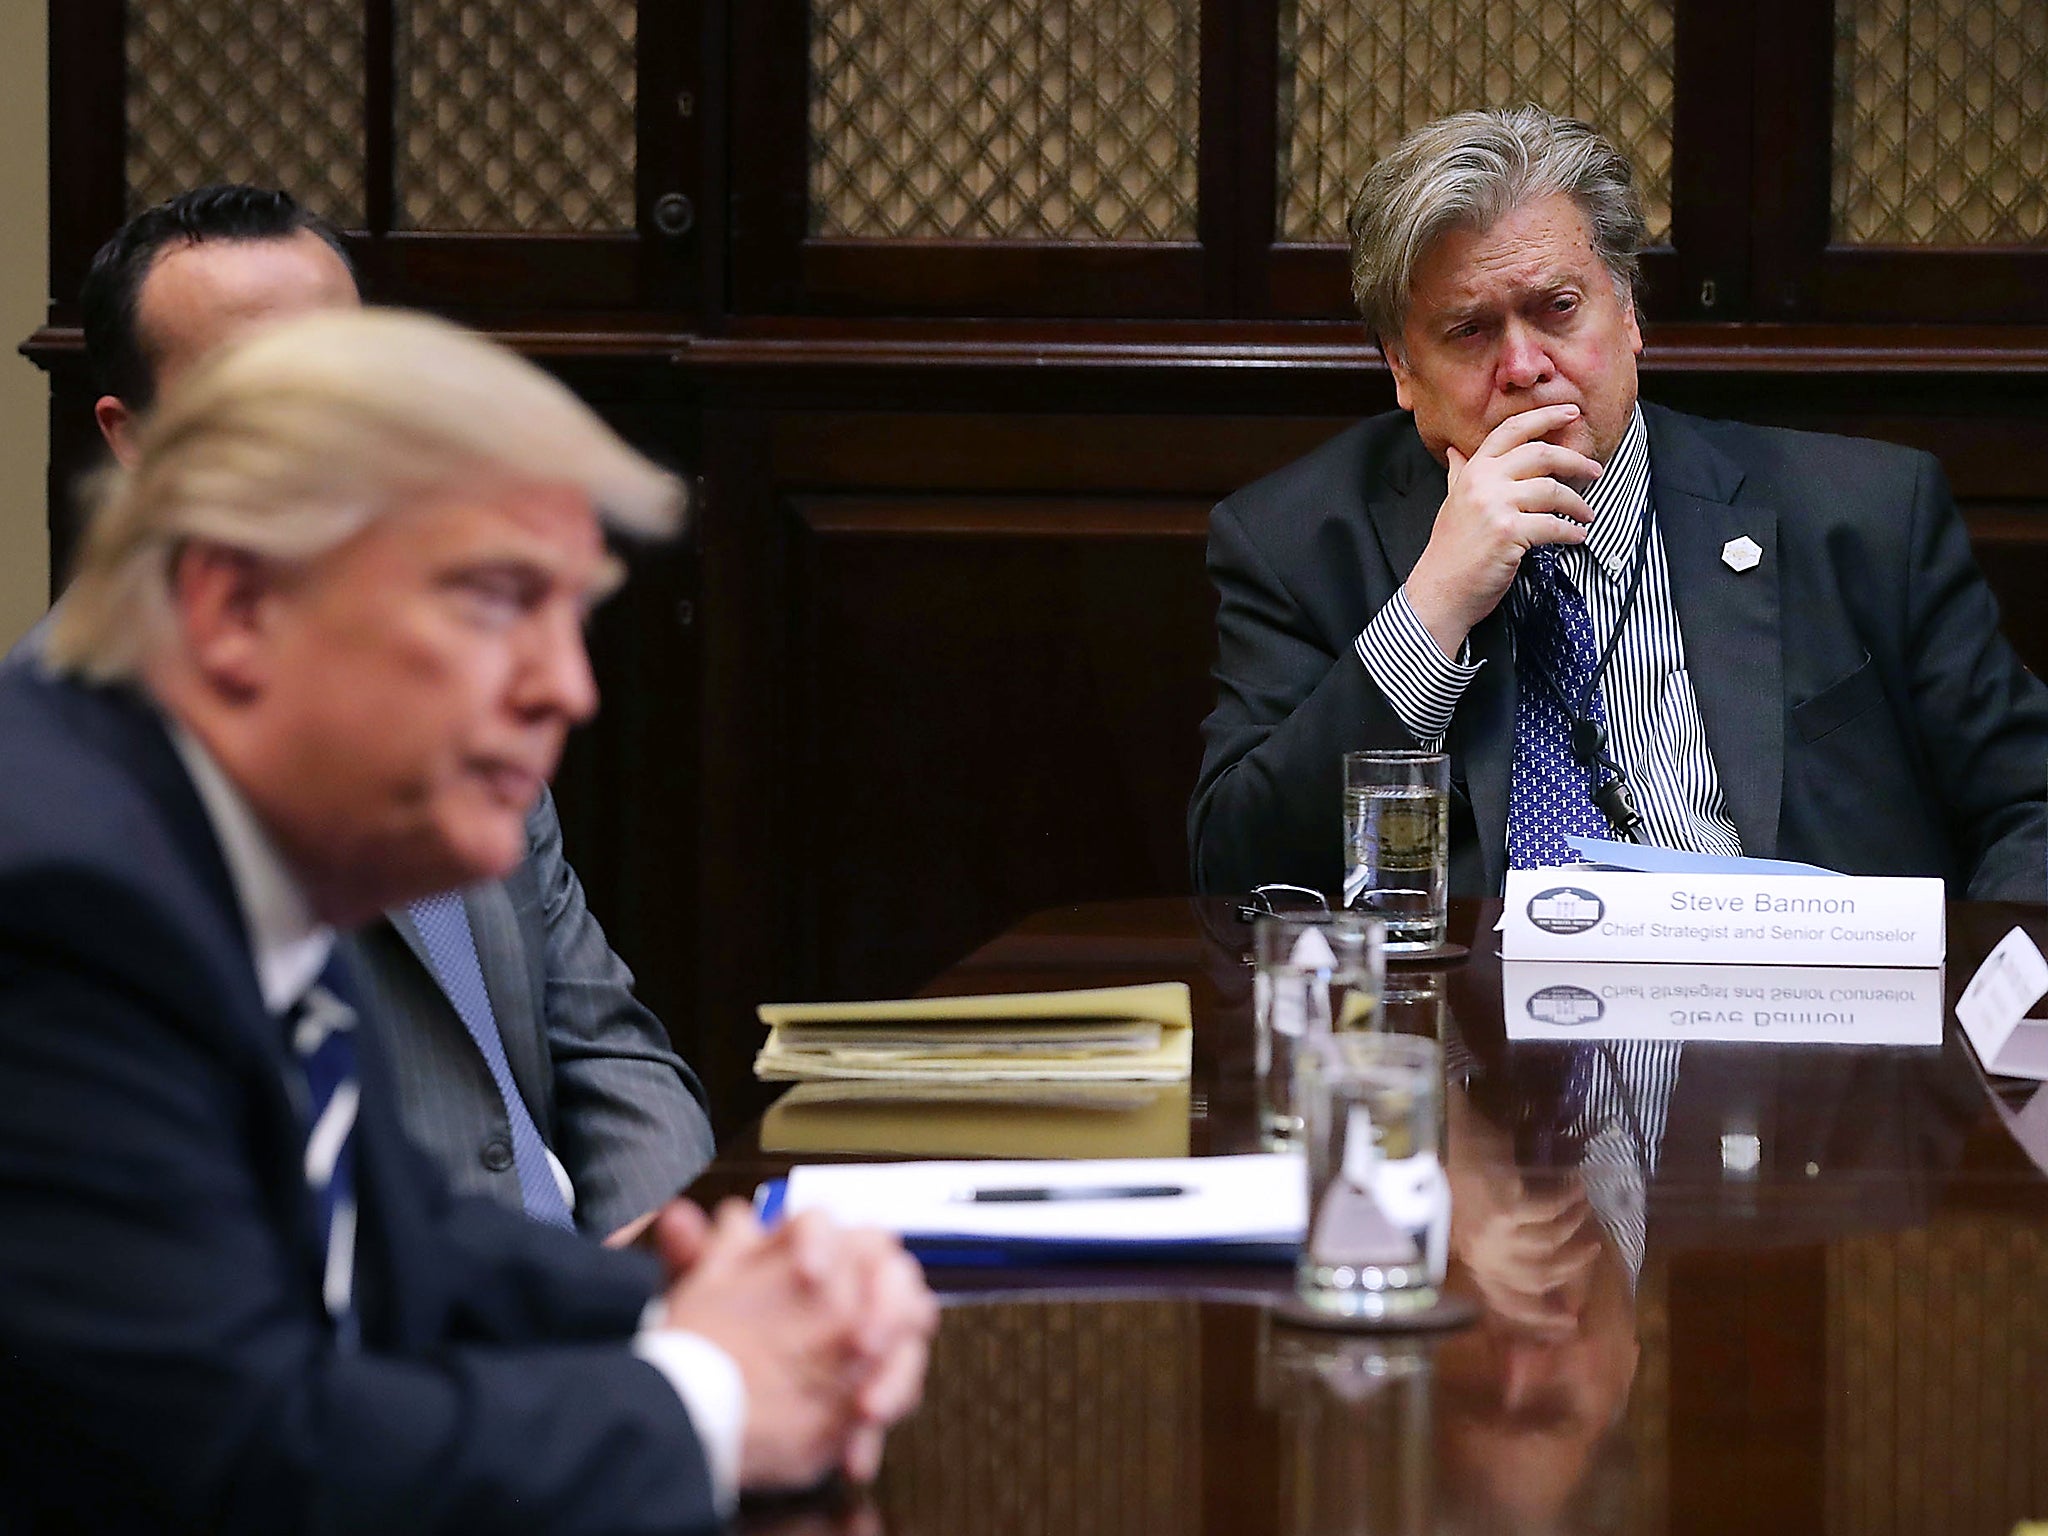 Dark heart of the White House: Steve Bannon’s proximity to President Trump makes him one of the most powerful, and potentially one of the most dangerous, men in America